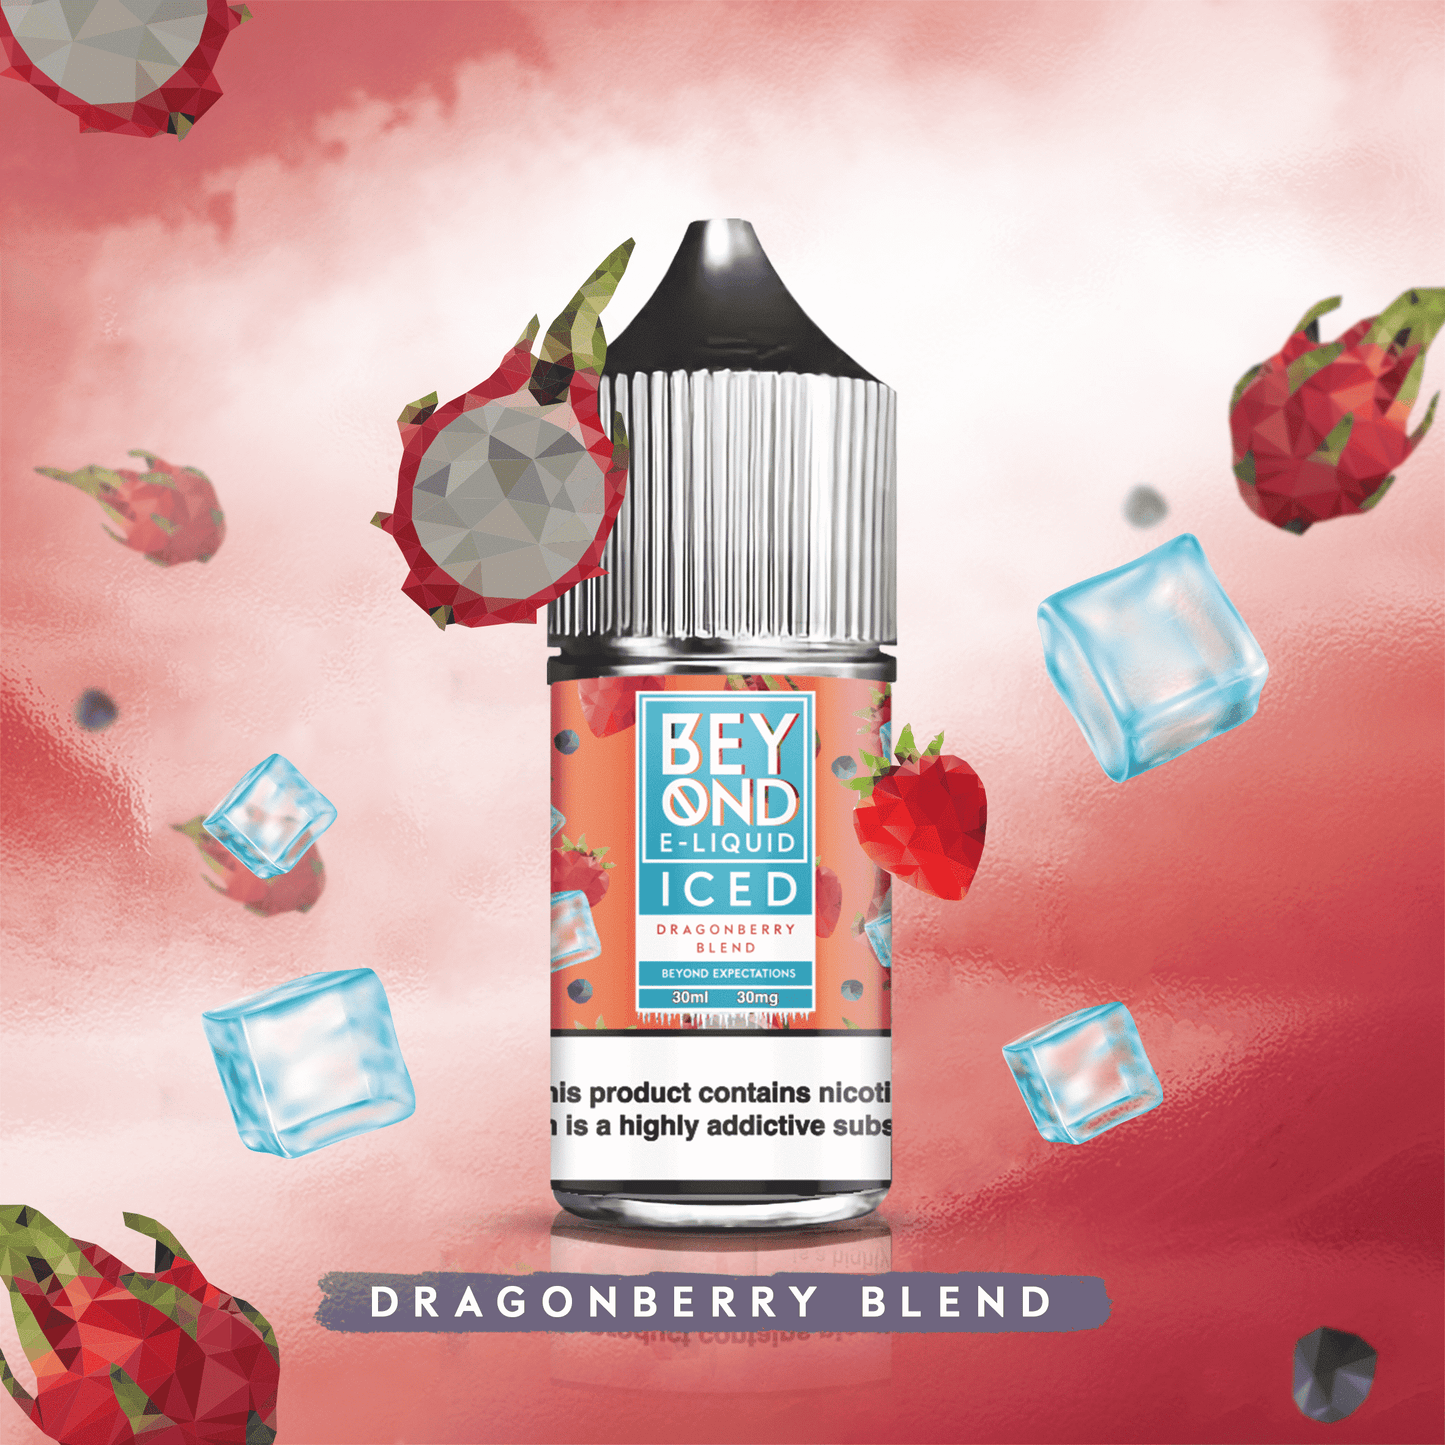 Buy Beyond Iced Dragon Berry Blend By Ivg Salt At Best Price In Pakistan